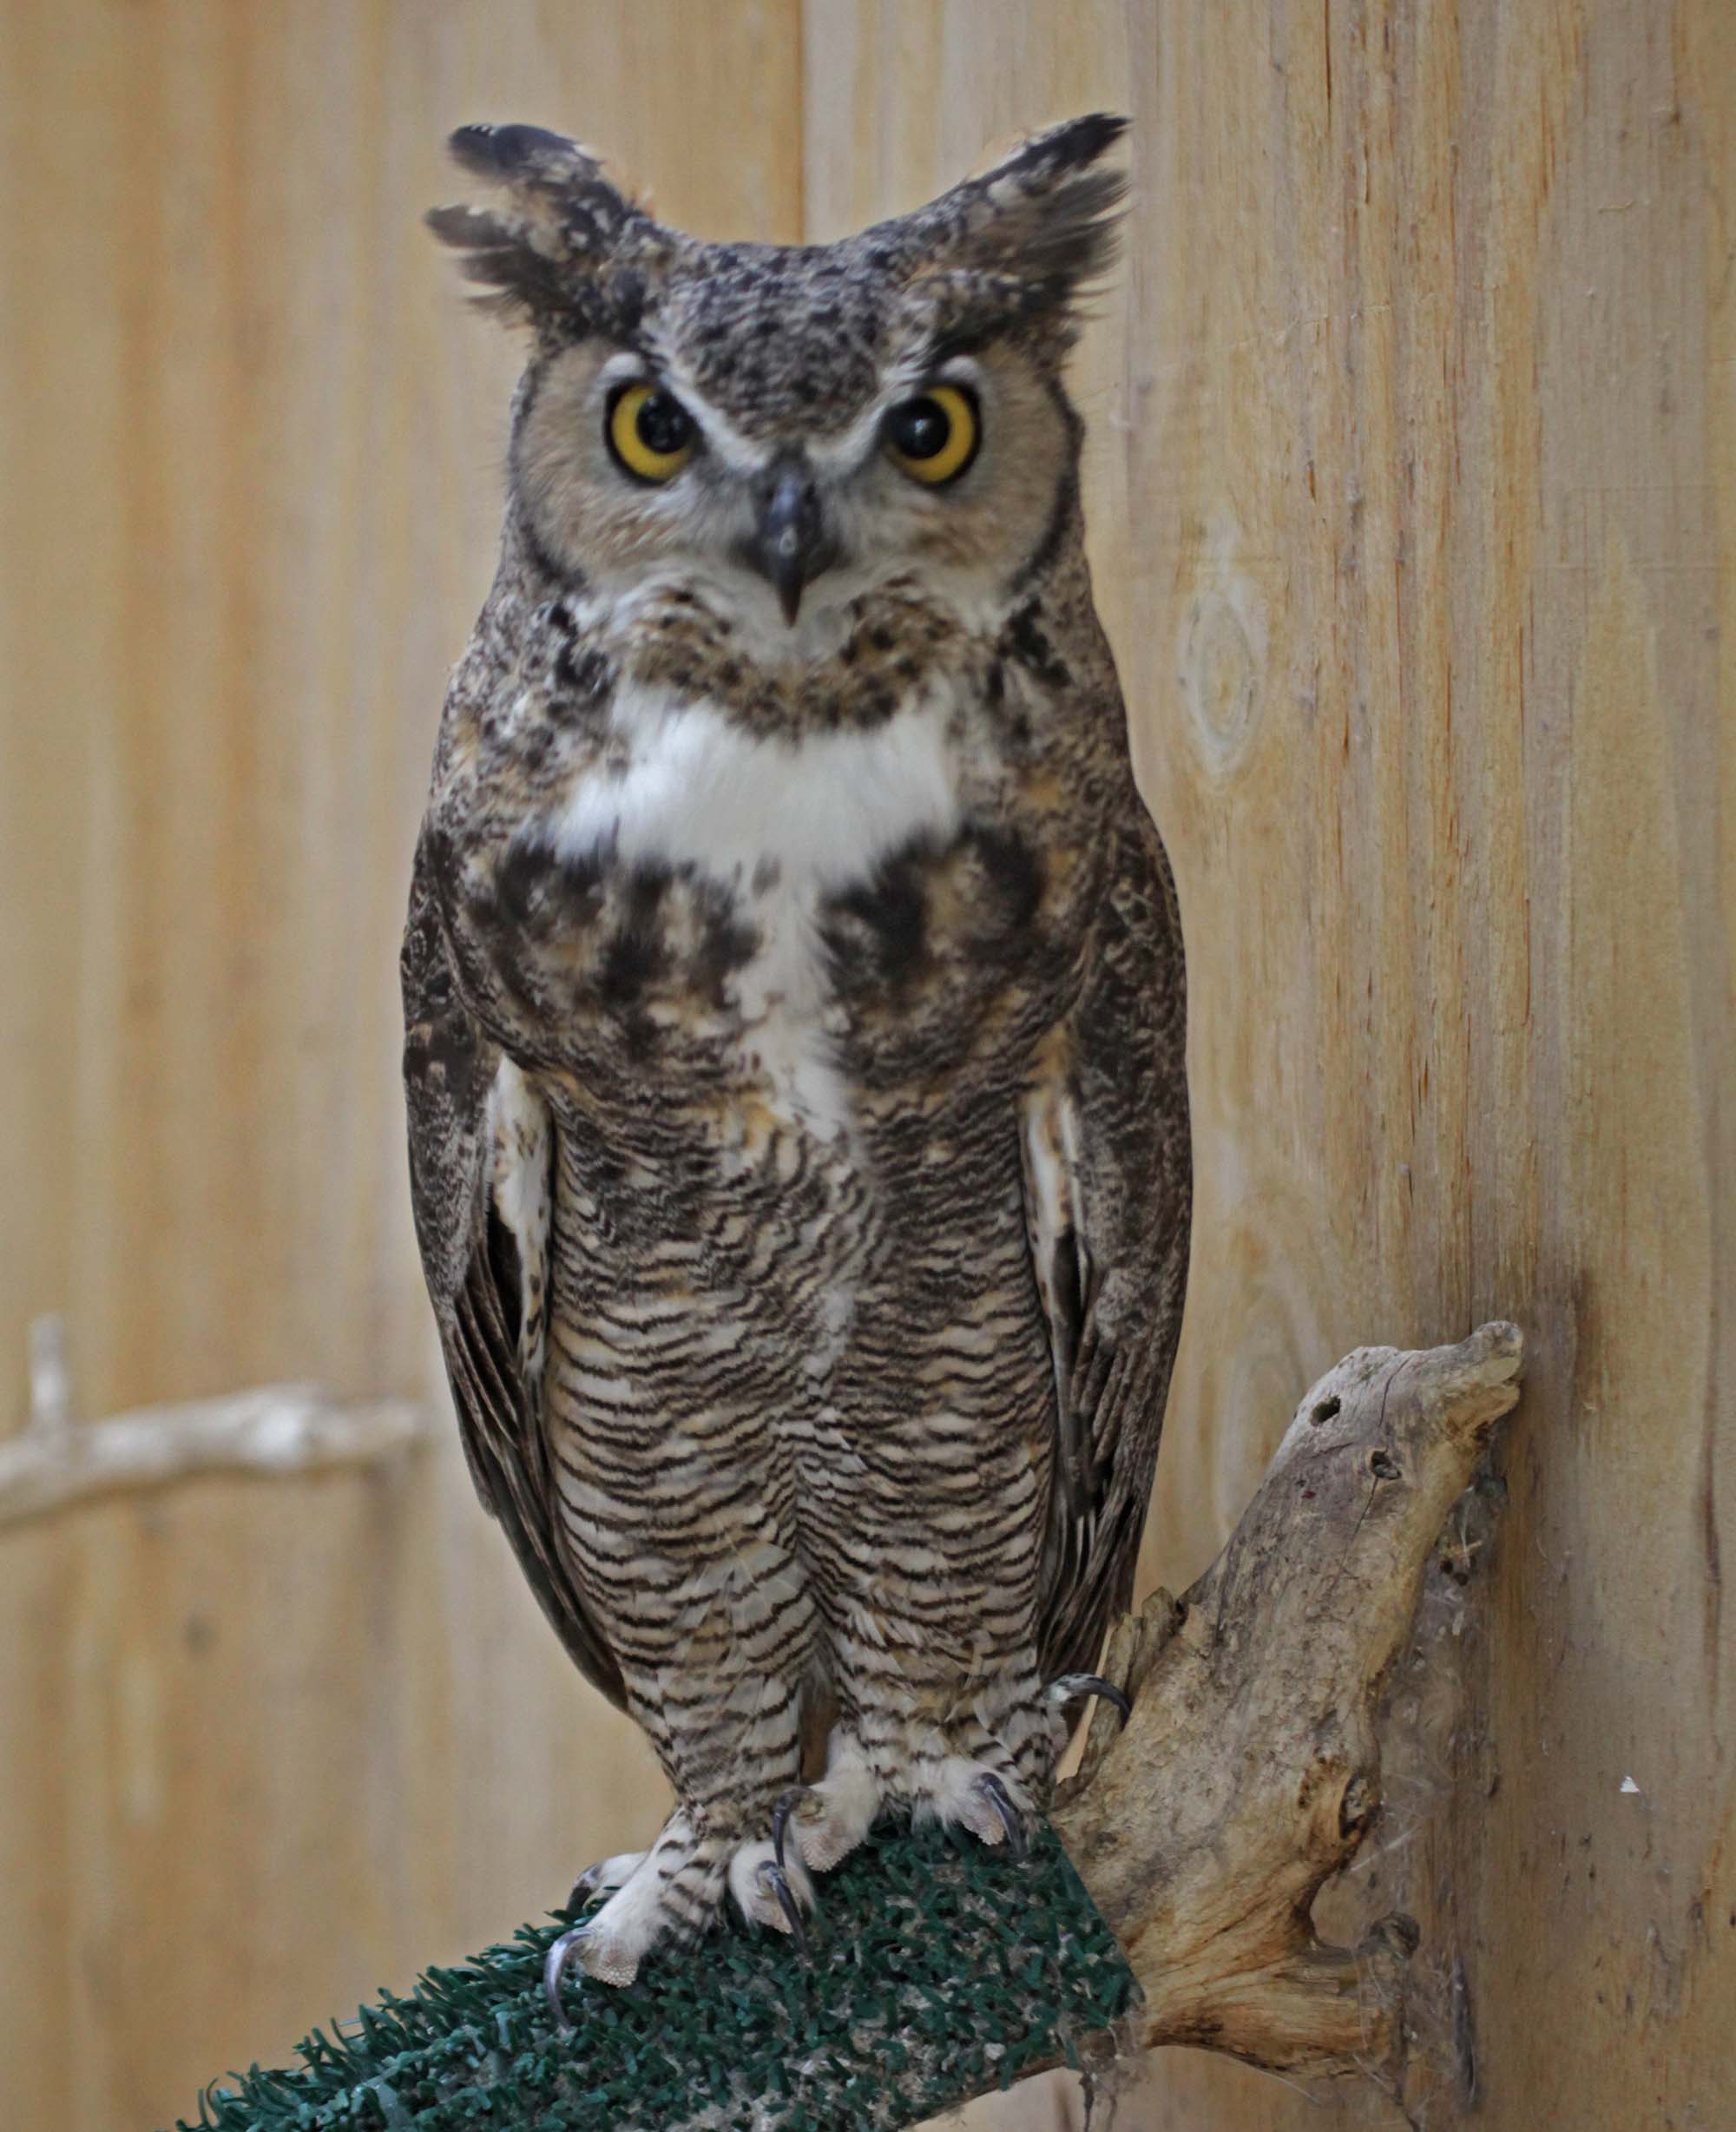 Pictures and information on Great Horned Owl